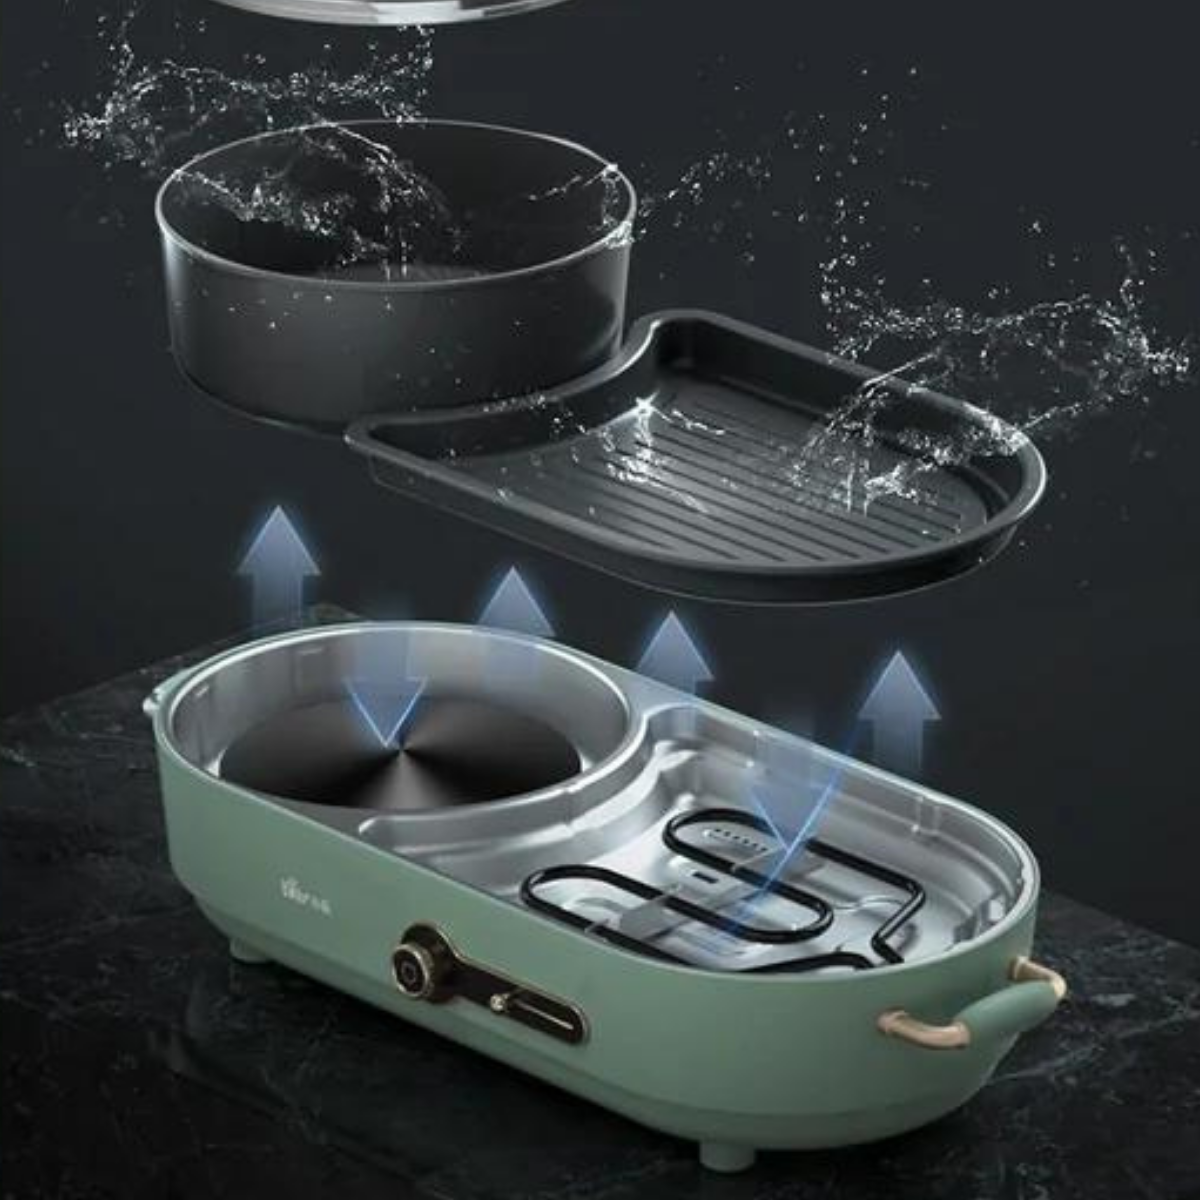 Bear Multi-functional 2-in-1 Cooking Hot Pot And Griddle Barbecue Machine